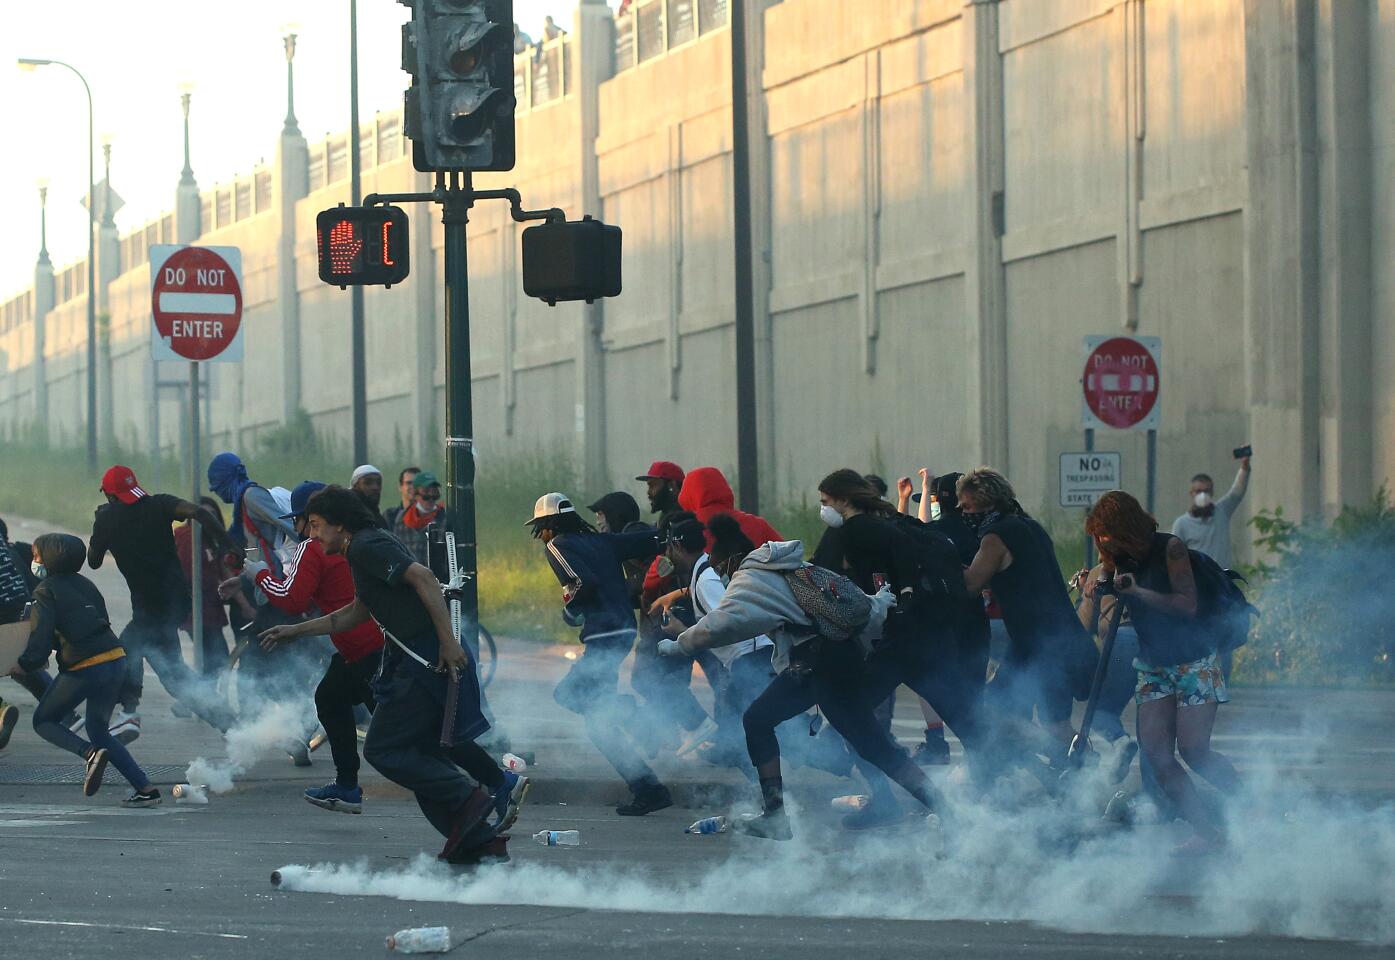 People run as tear gas canisters land near them.